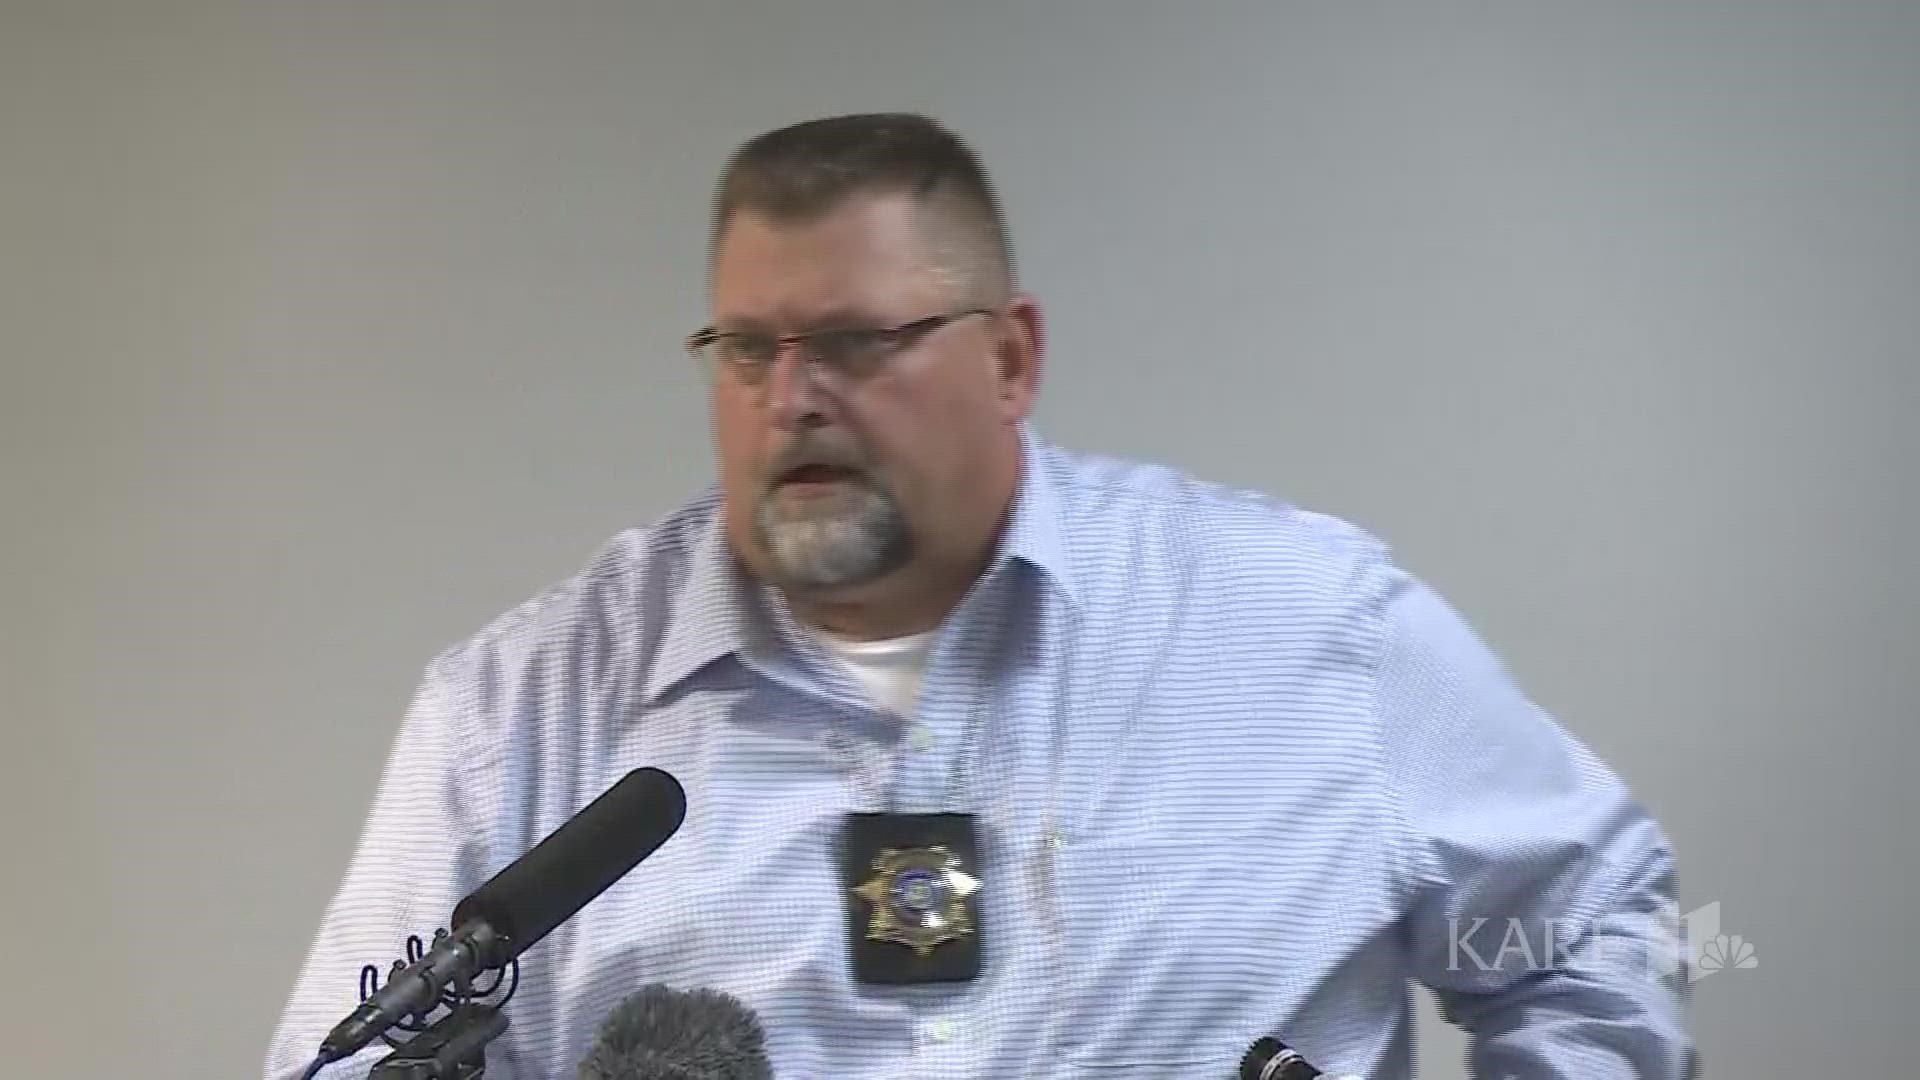 Officials are holding a press conference to update the public after four Minnesotans were found dead in an abandoned vehicle near the town of Sheridan, Wisconsin.